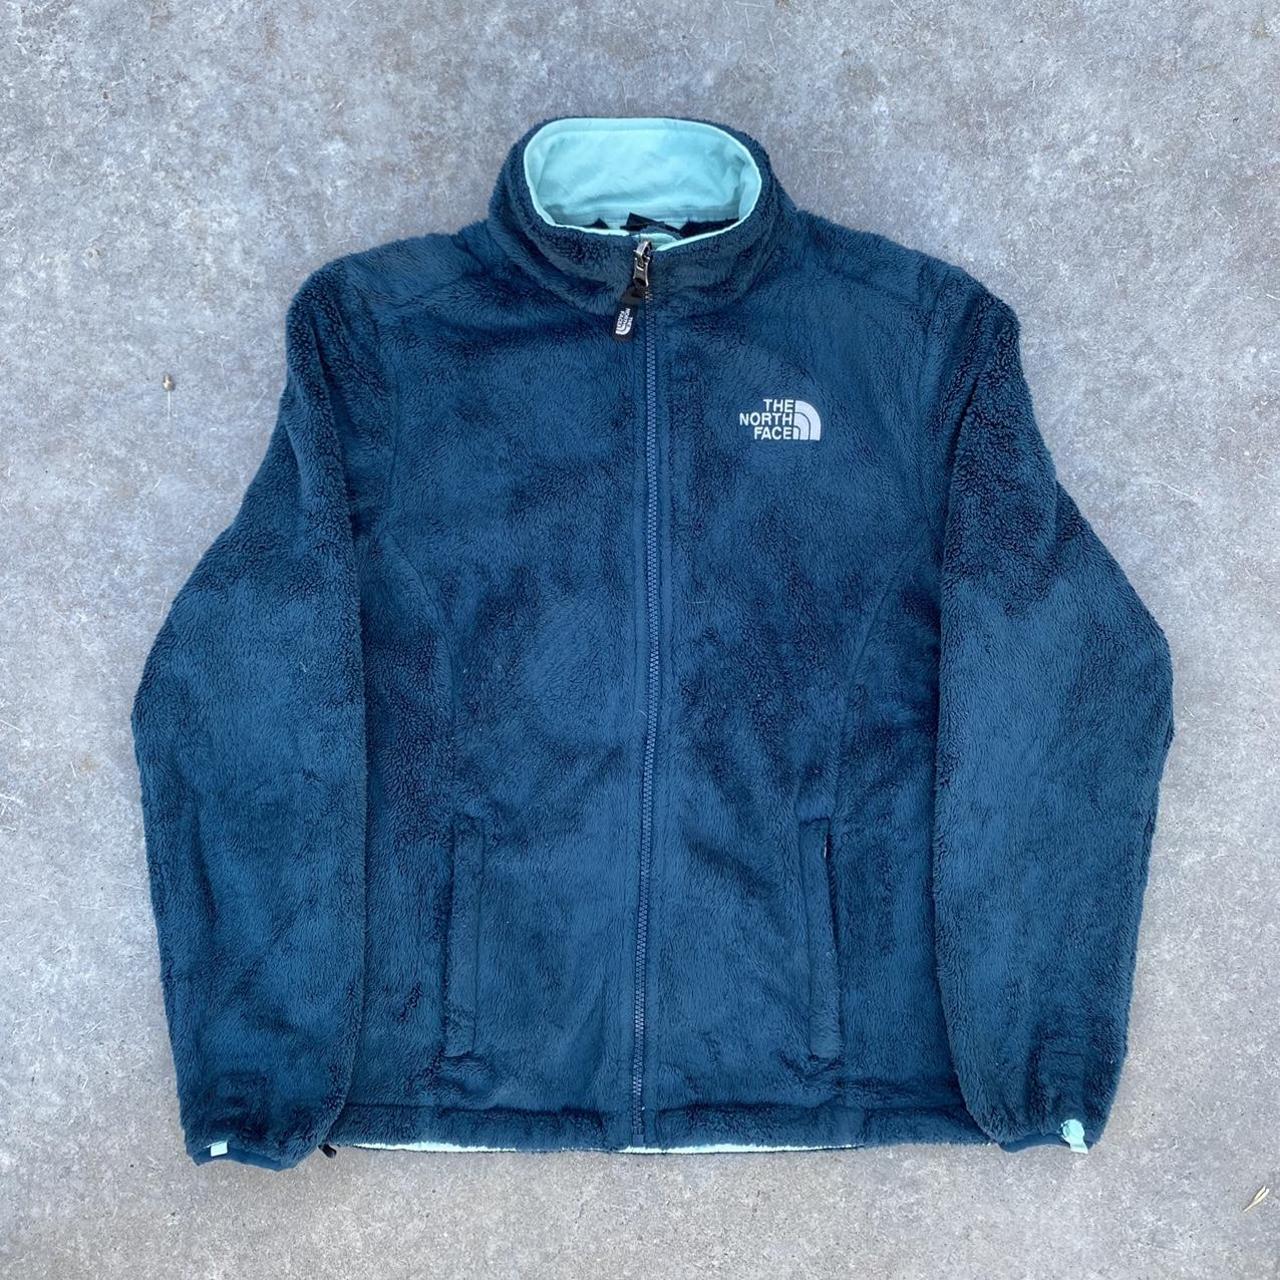 The North Face Women's Blue and White Jacket | Depop